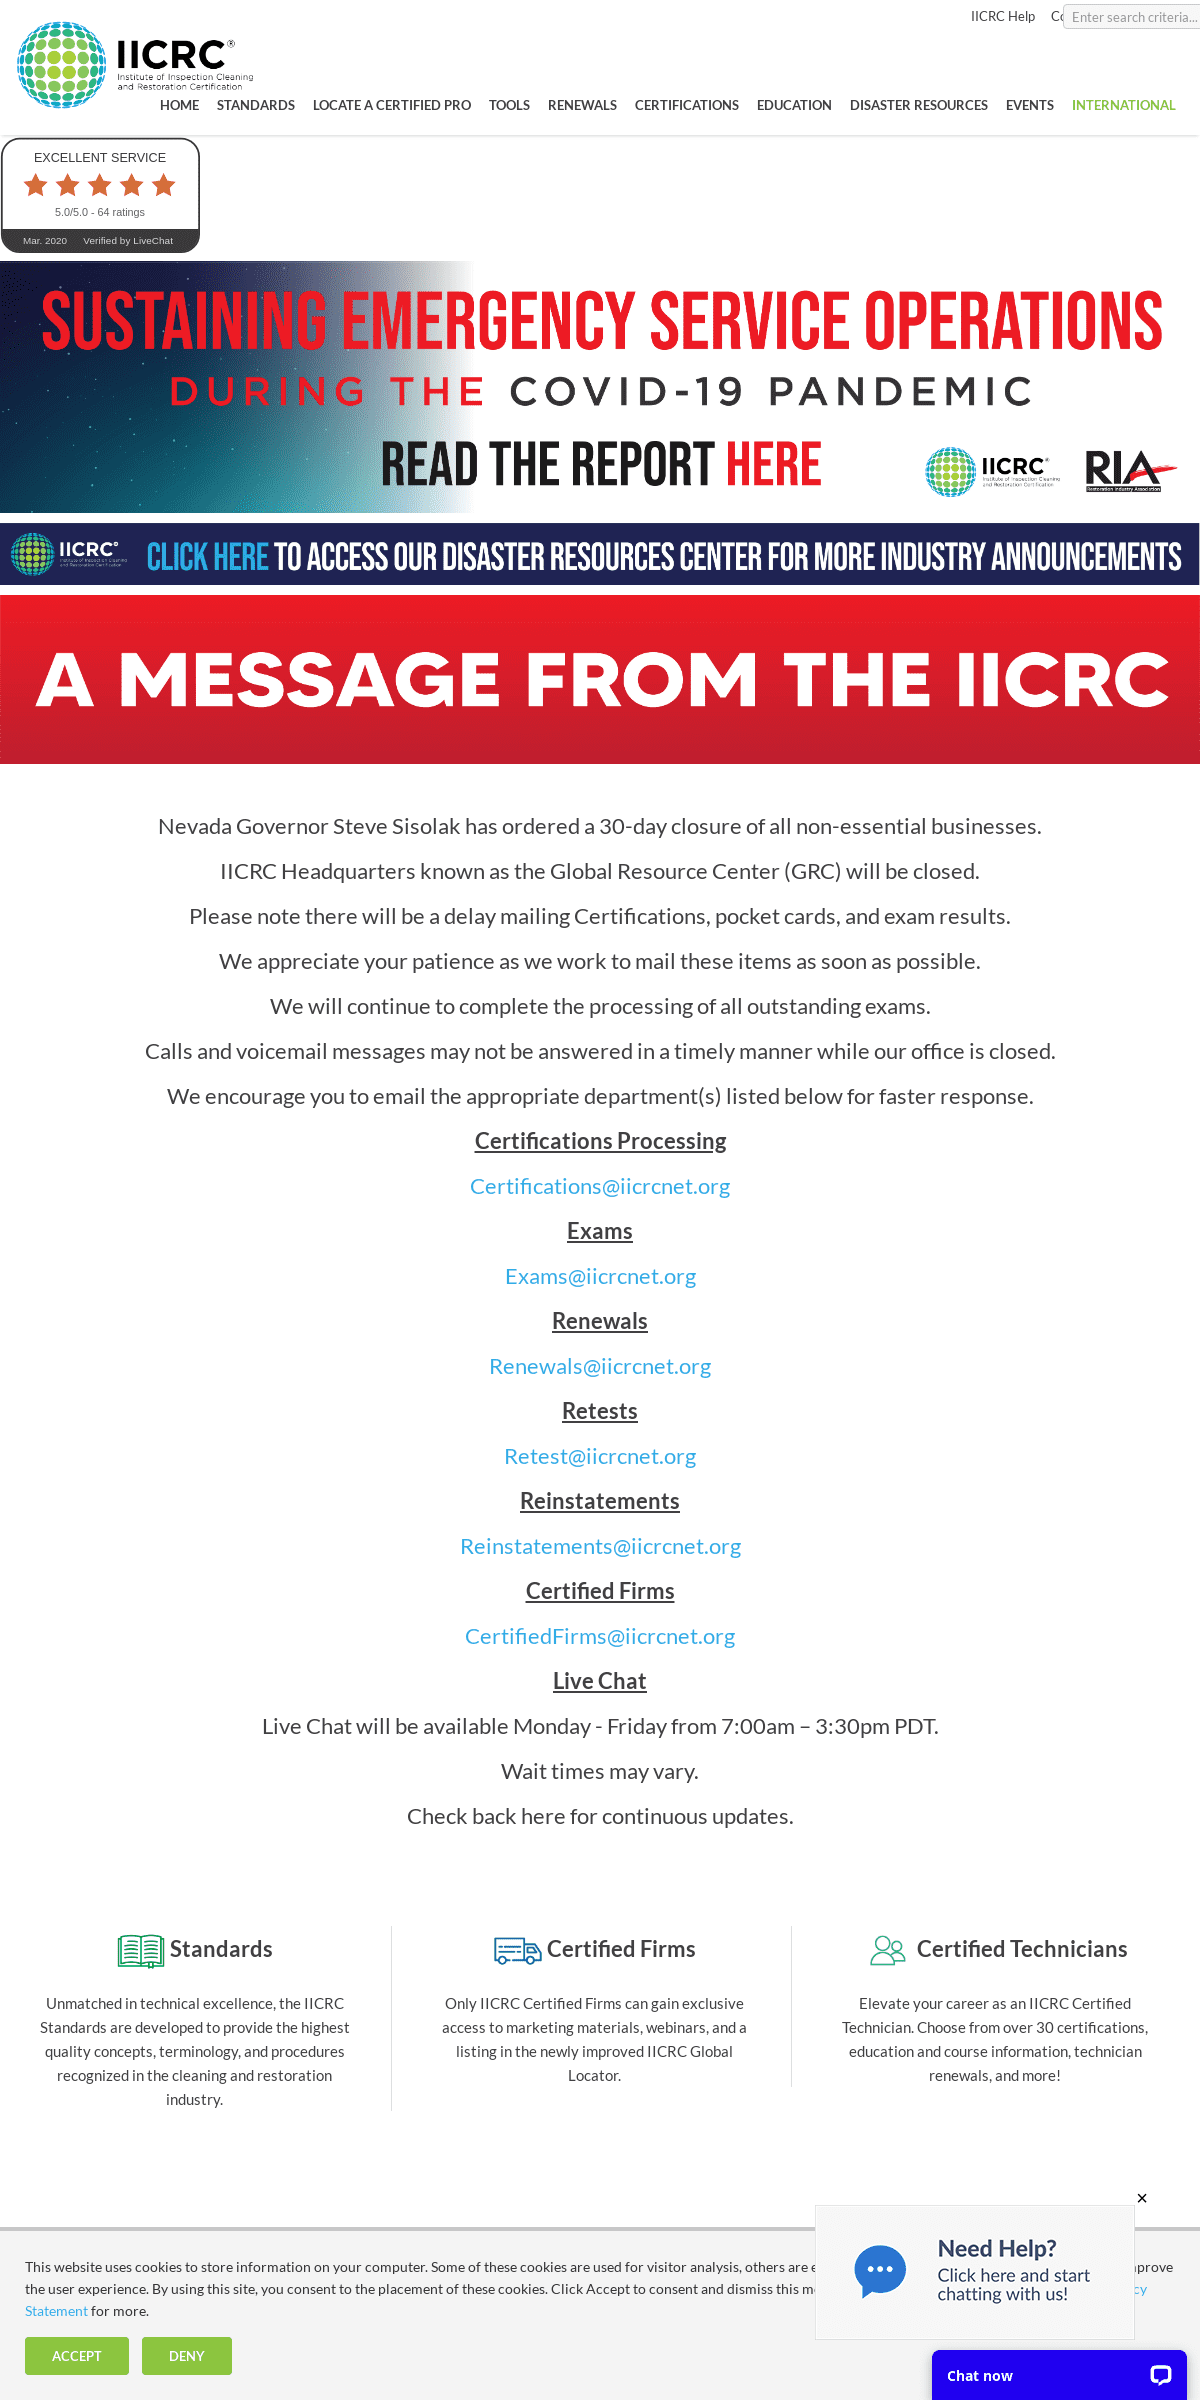 A complete backup of iicrc.org